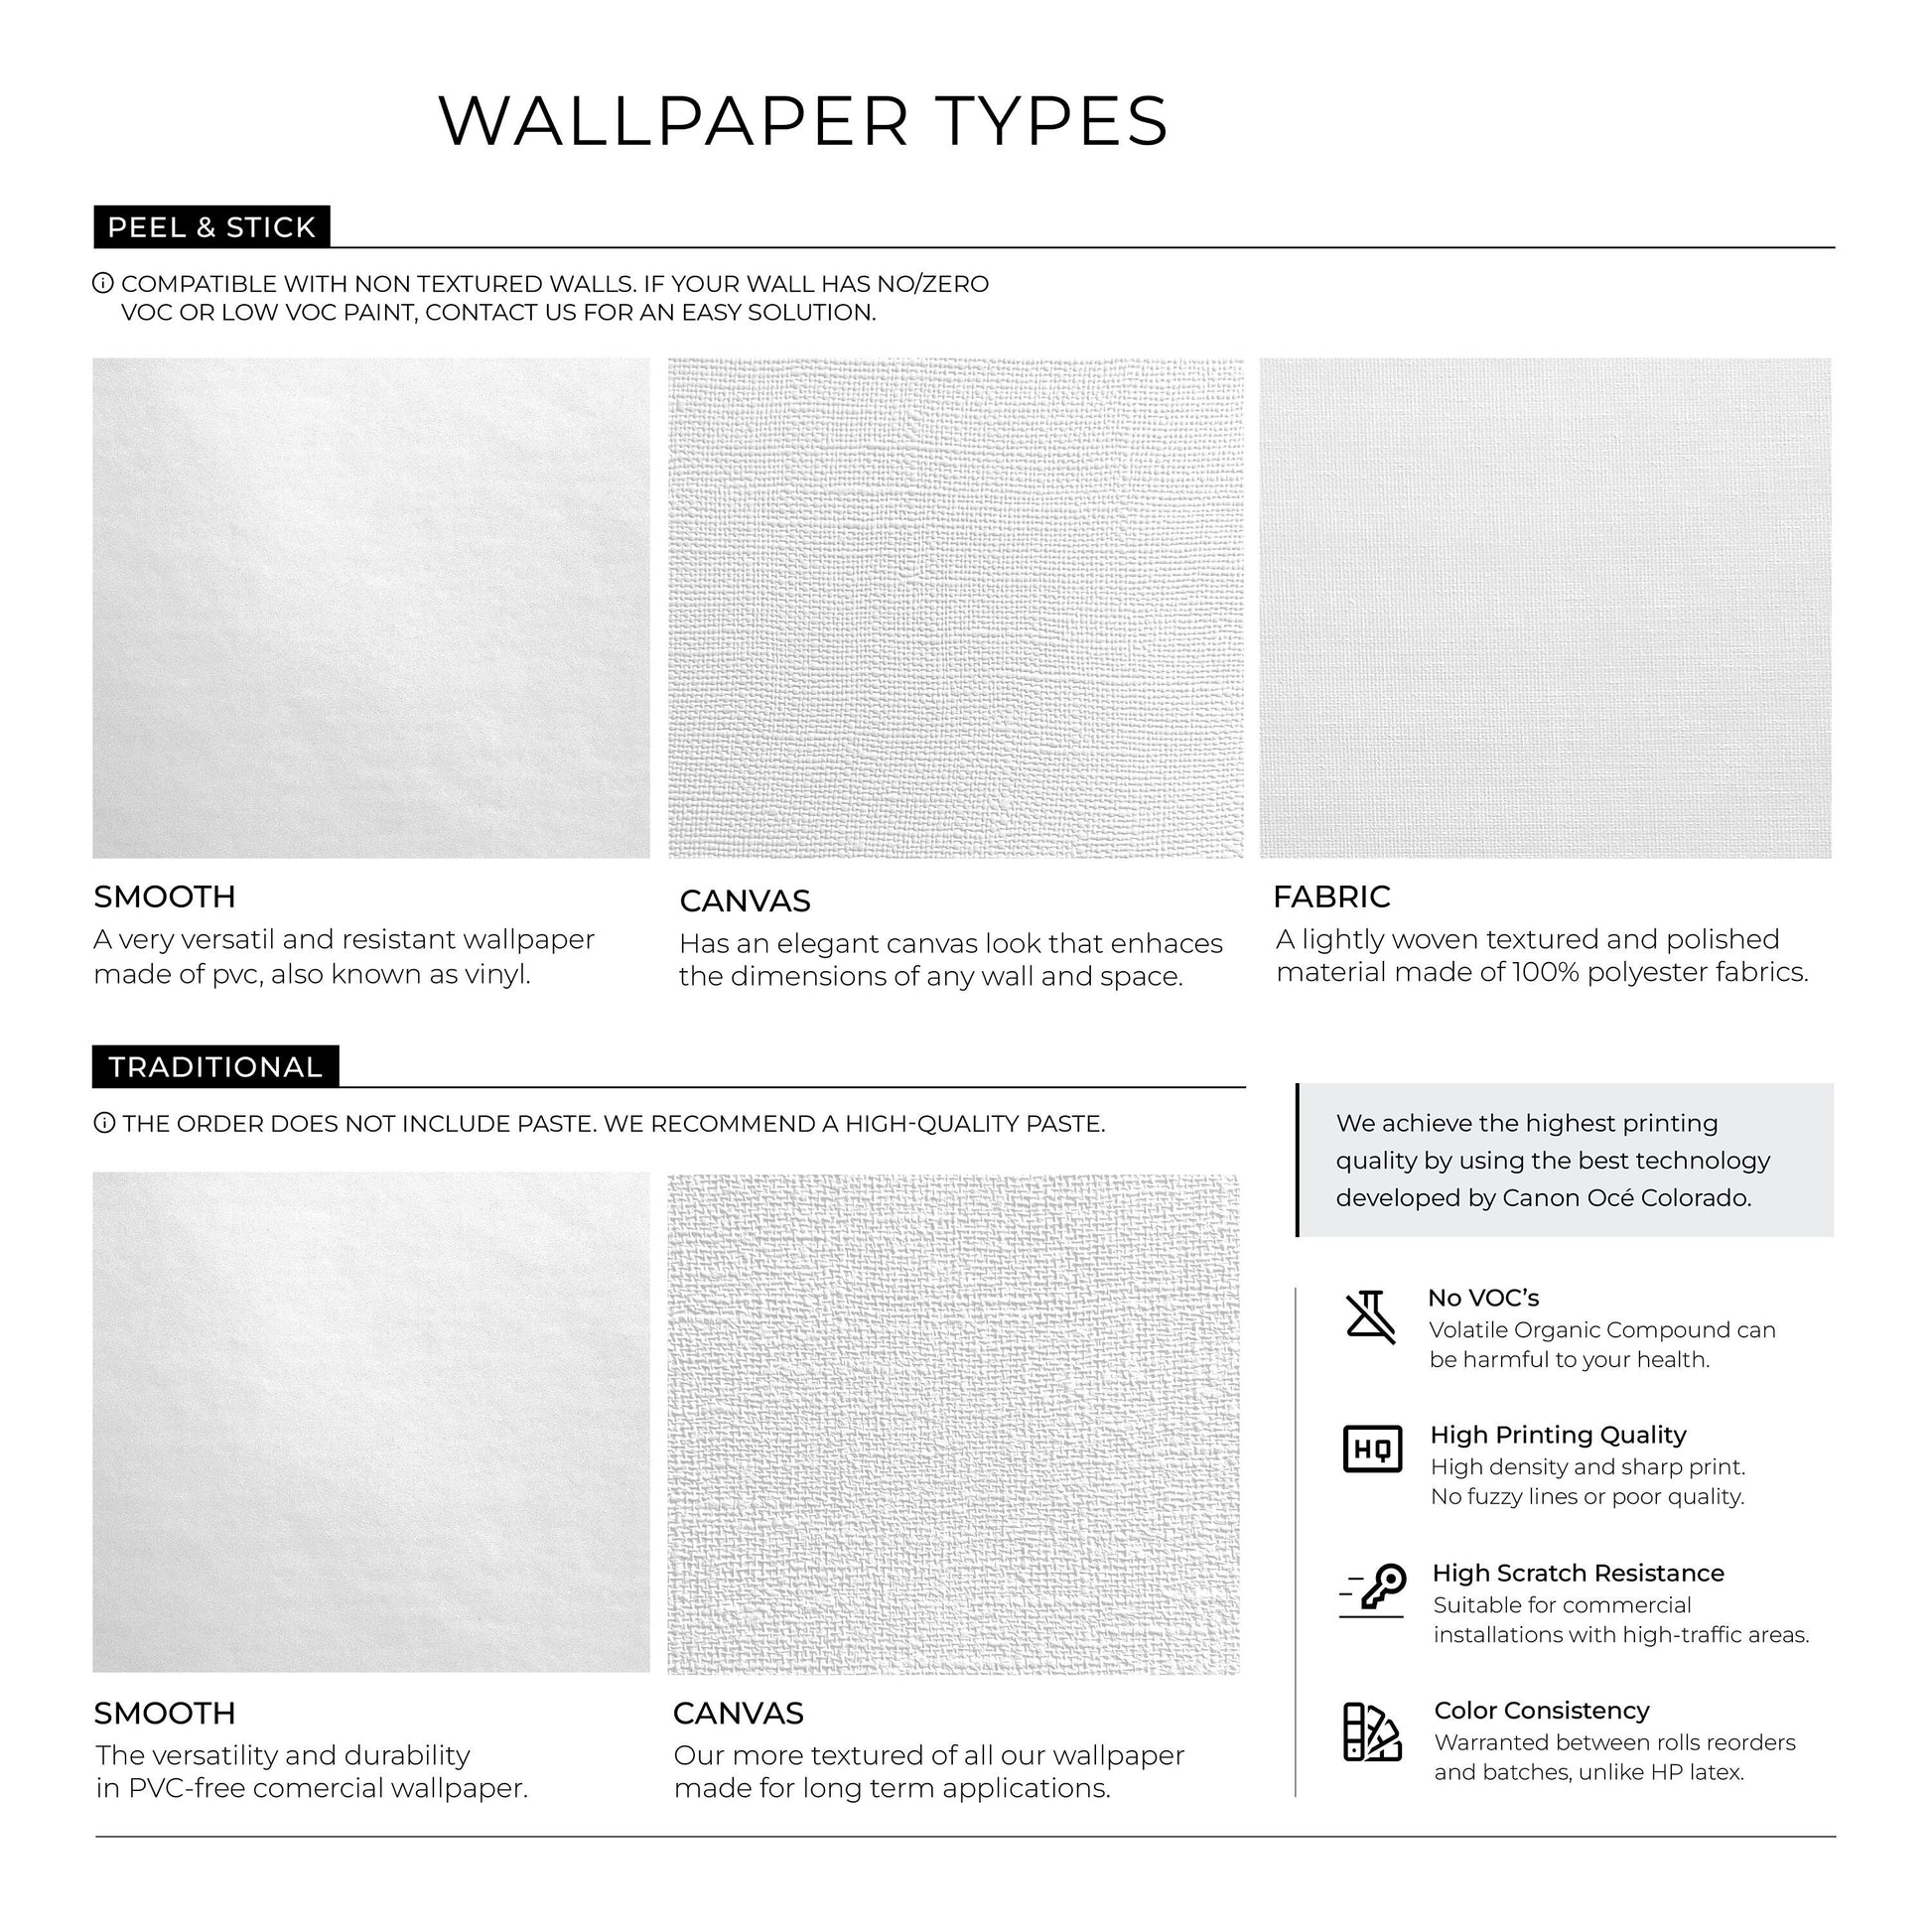 Removable Wallpaper Peel and Stick Wallpaper Wall Paper Wall Mural - Hand Draw Wallpaper - A533